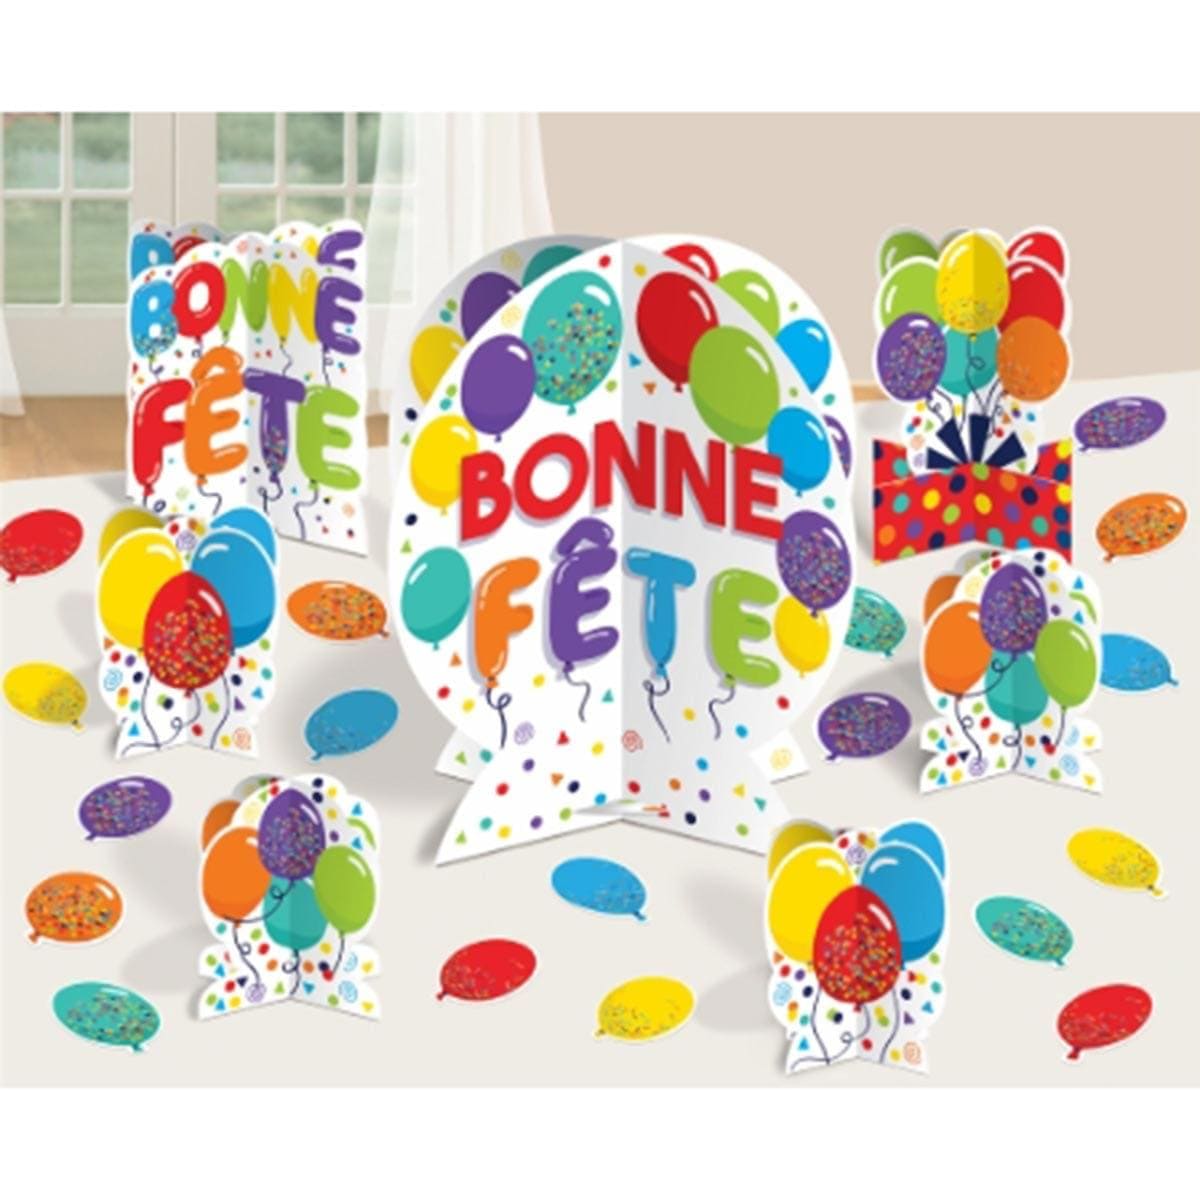 Buy General Birthday Bonne Fête Balloons - Table Decorating Kit sold at Party Expert